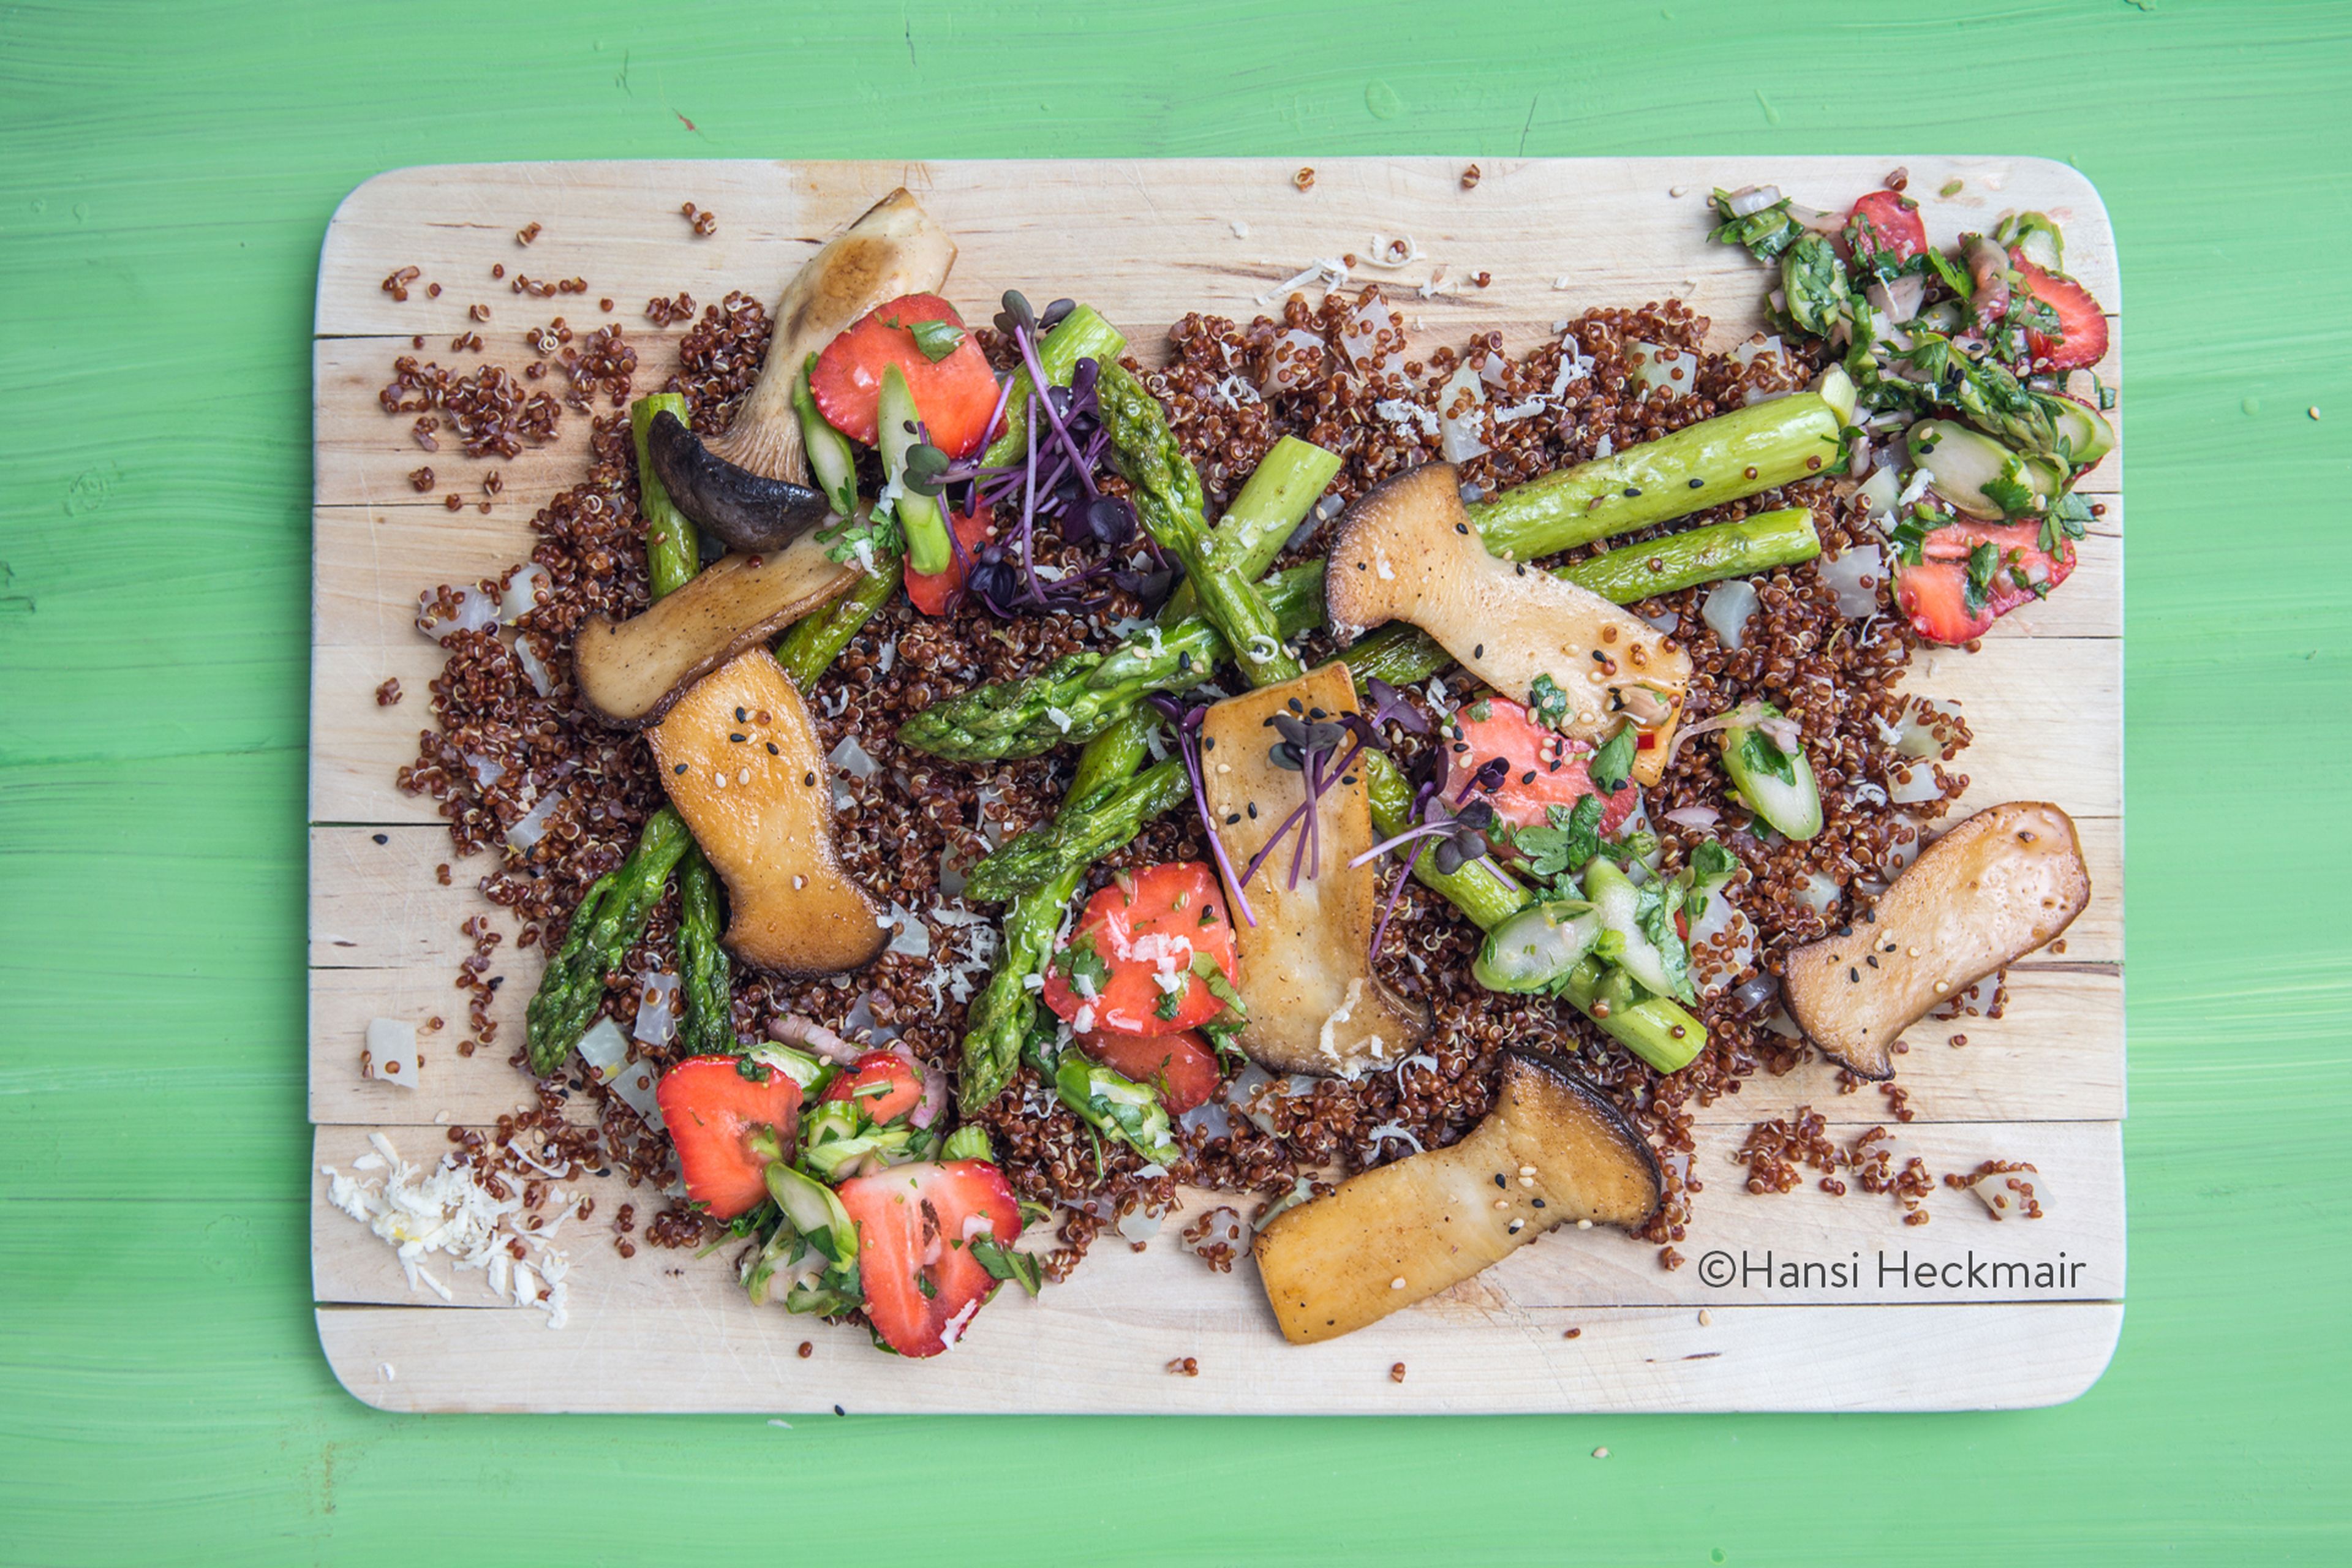 Quinoa salad with king oyster mushrooms, asparagus, and strawberries